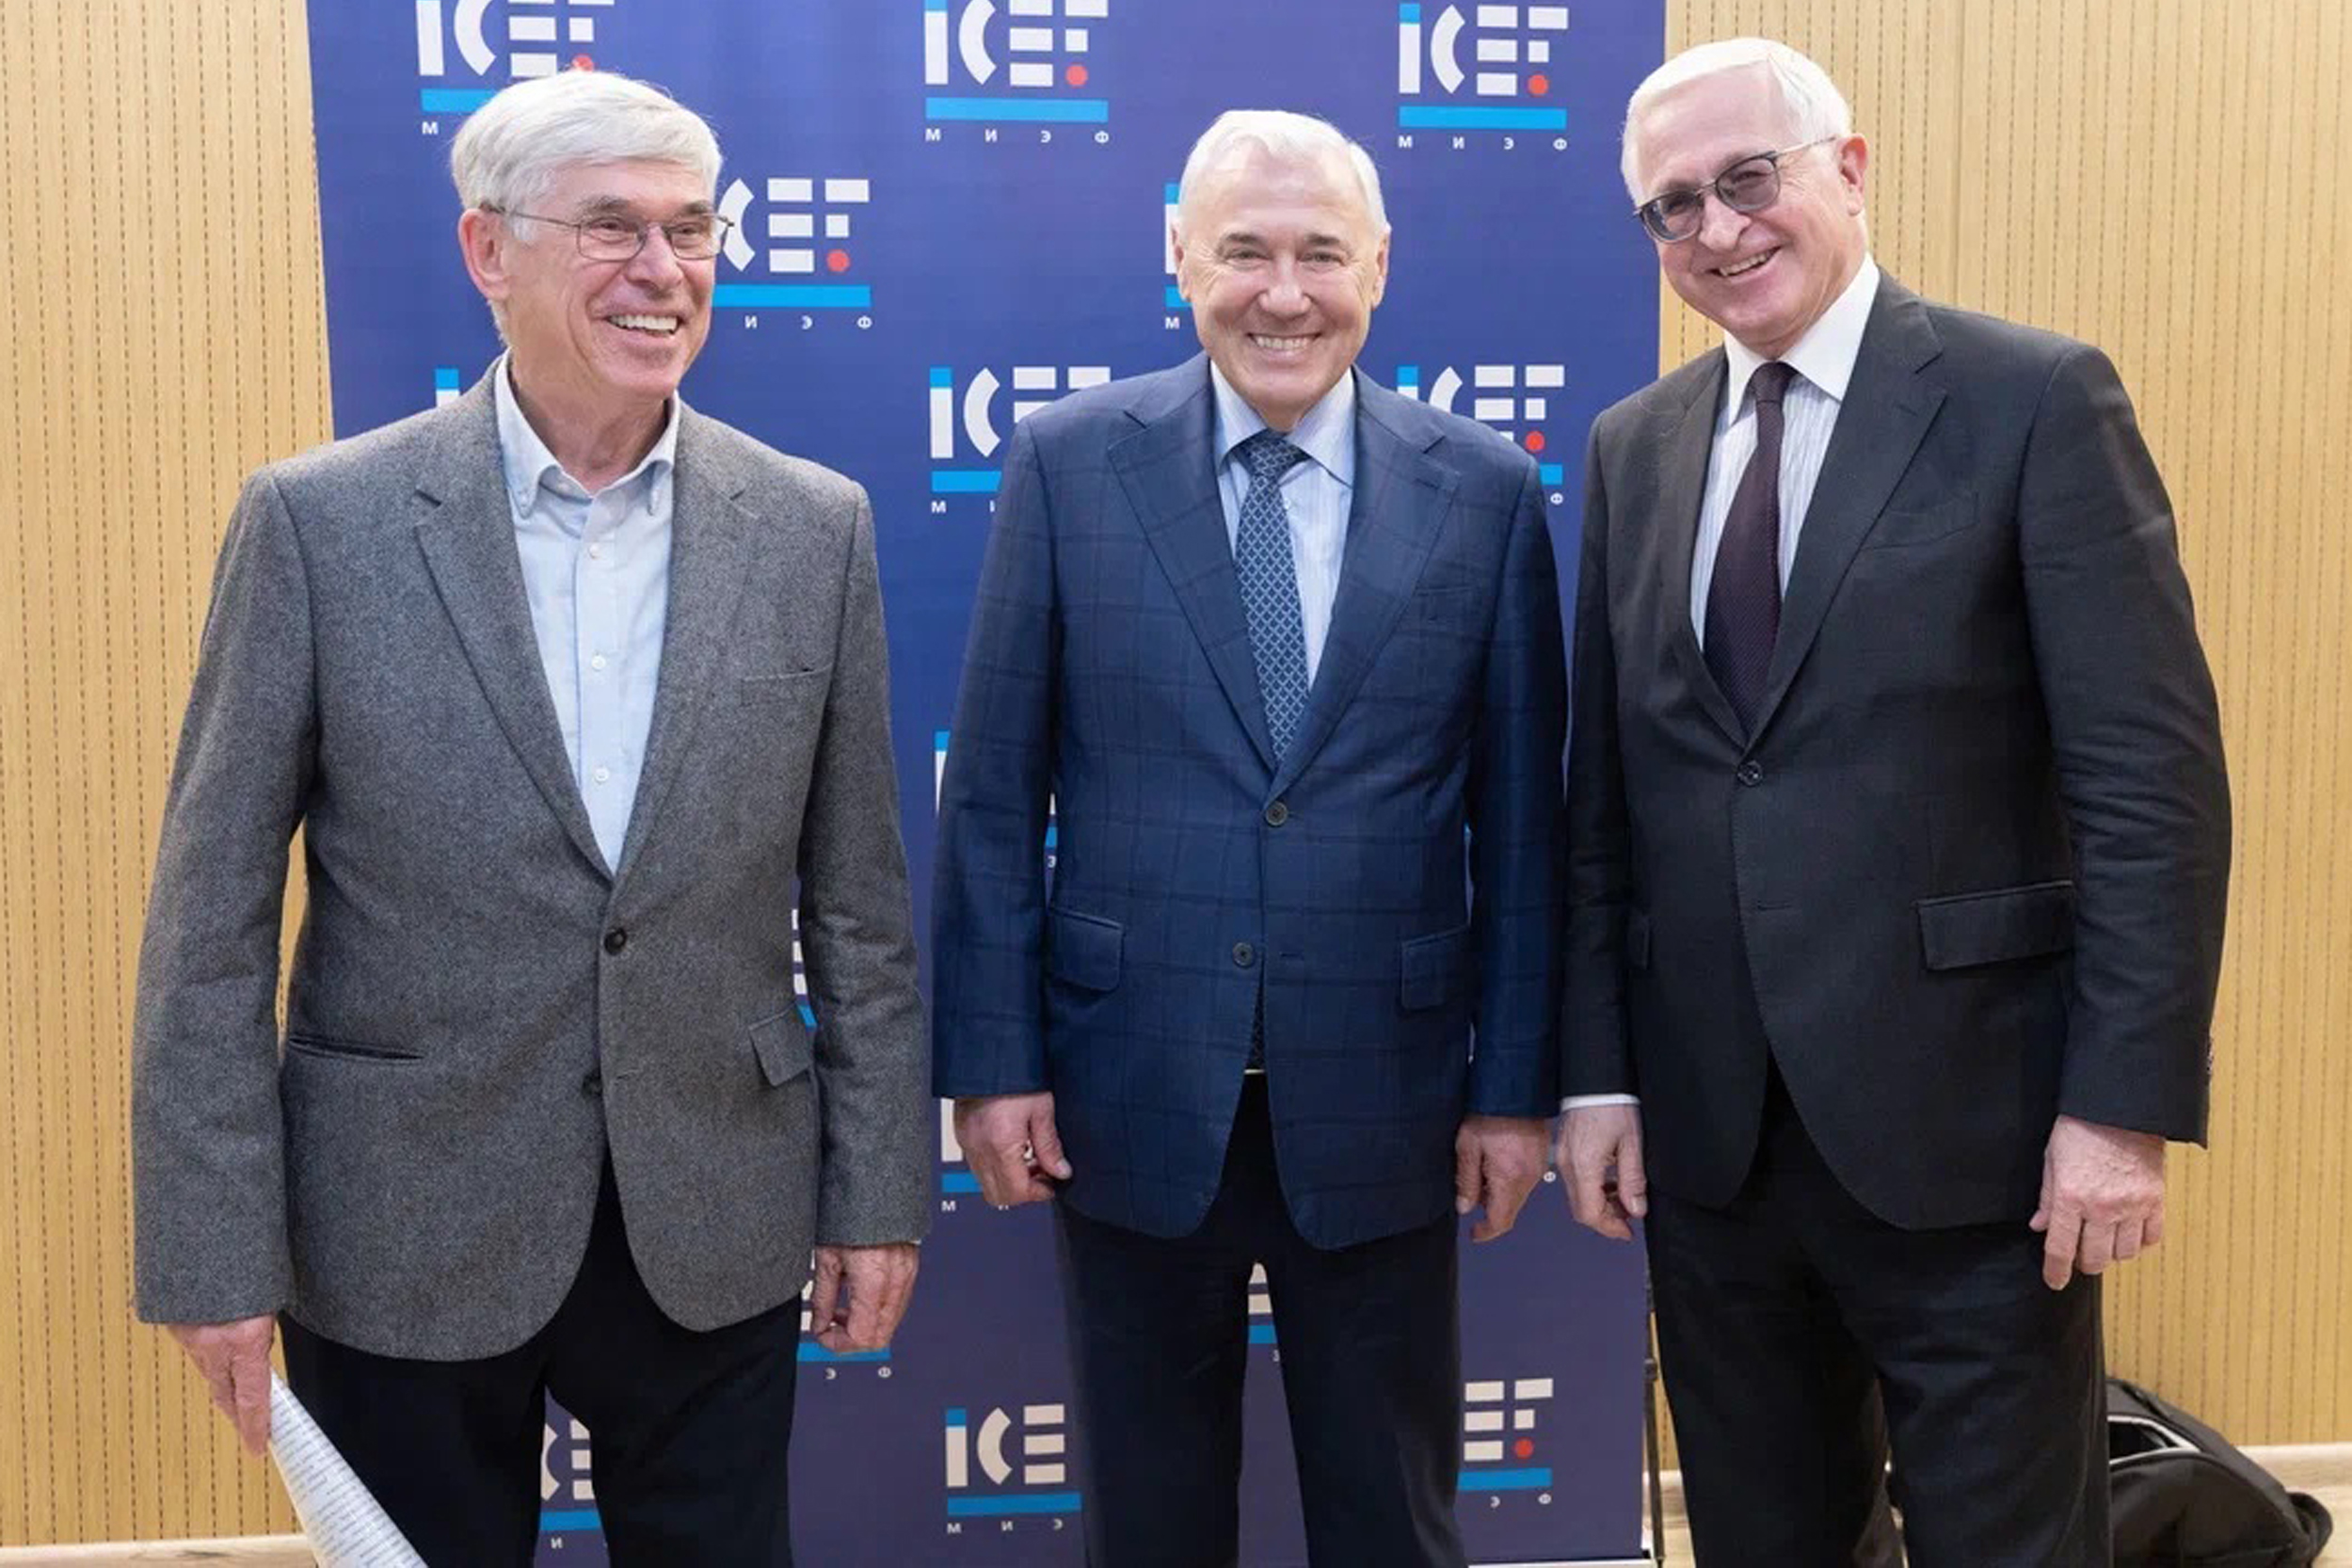 Left to right: HSE ICEF Director Sergey Yakovlev, Russian State Duma Financial Market Committee Chairman Anatoly Aksakov, HSE President and President of the Russian Industrialists and Entrepreneurs Association Alexander Shokhin